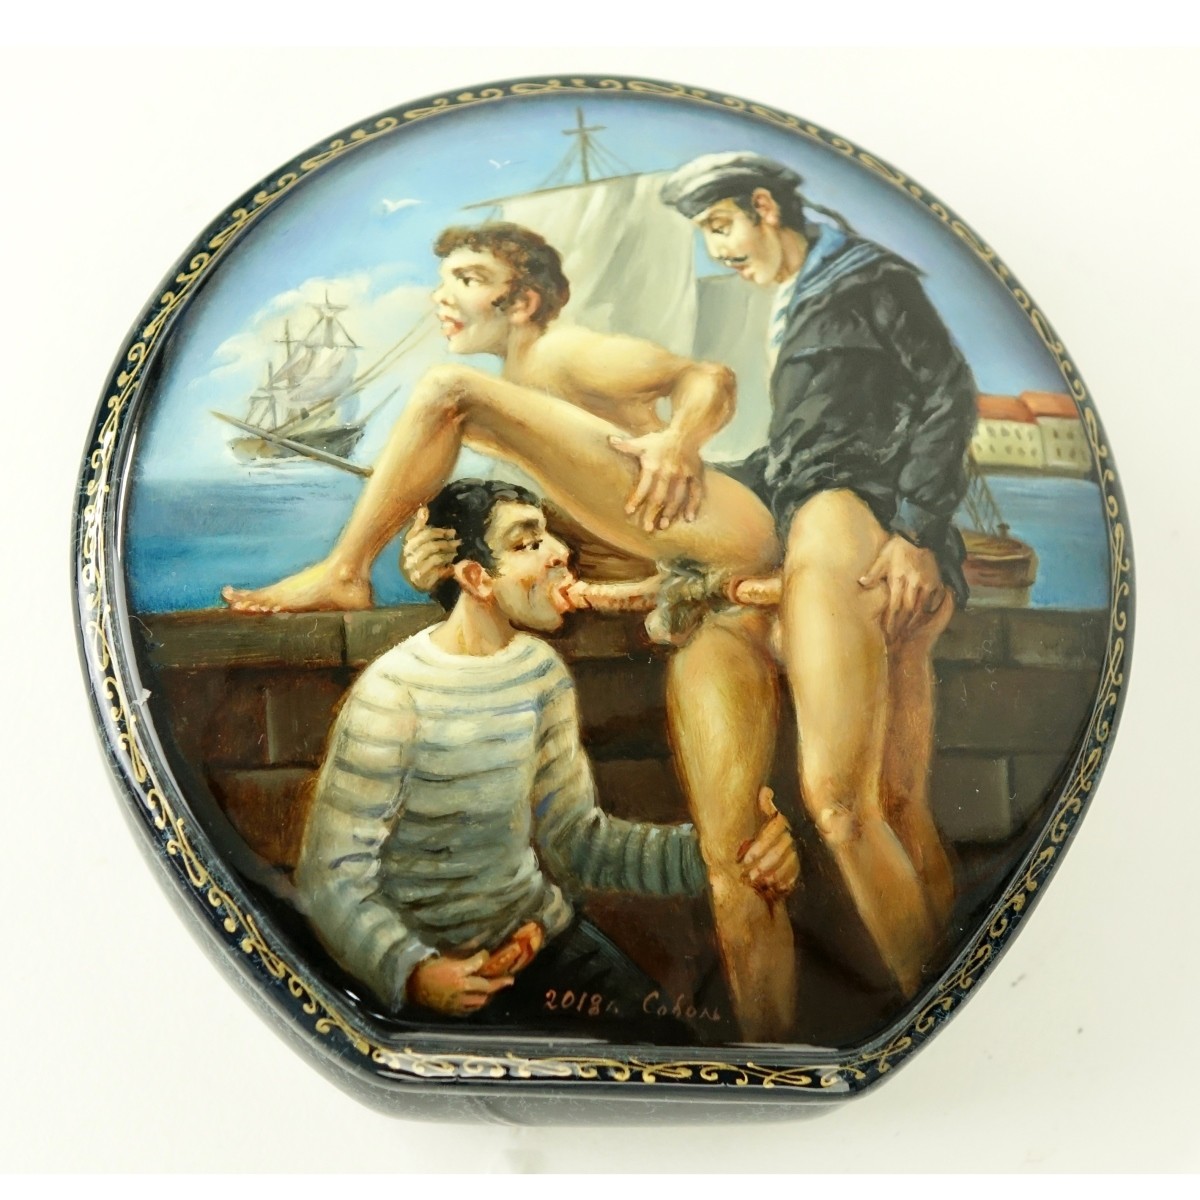 Russian Lacquer Hinged Box With Erotic Scenes